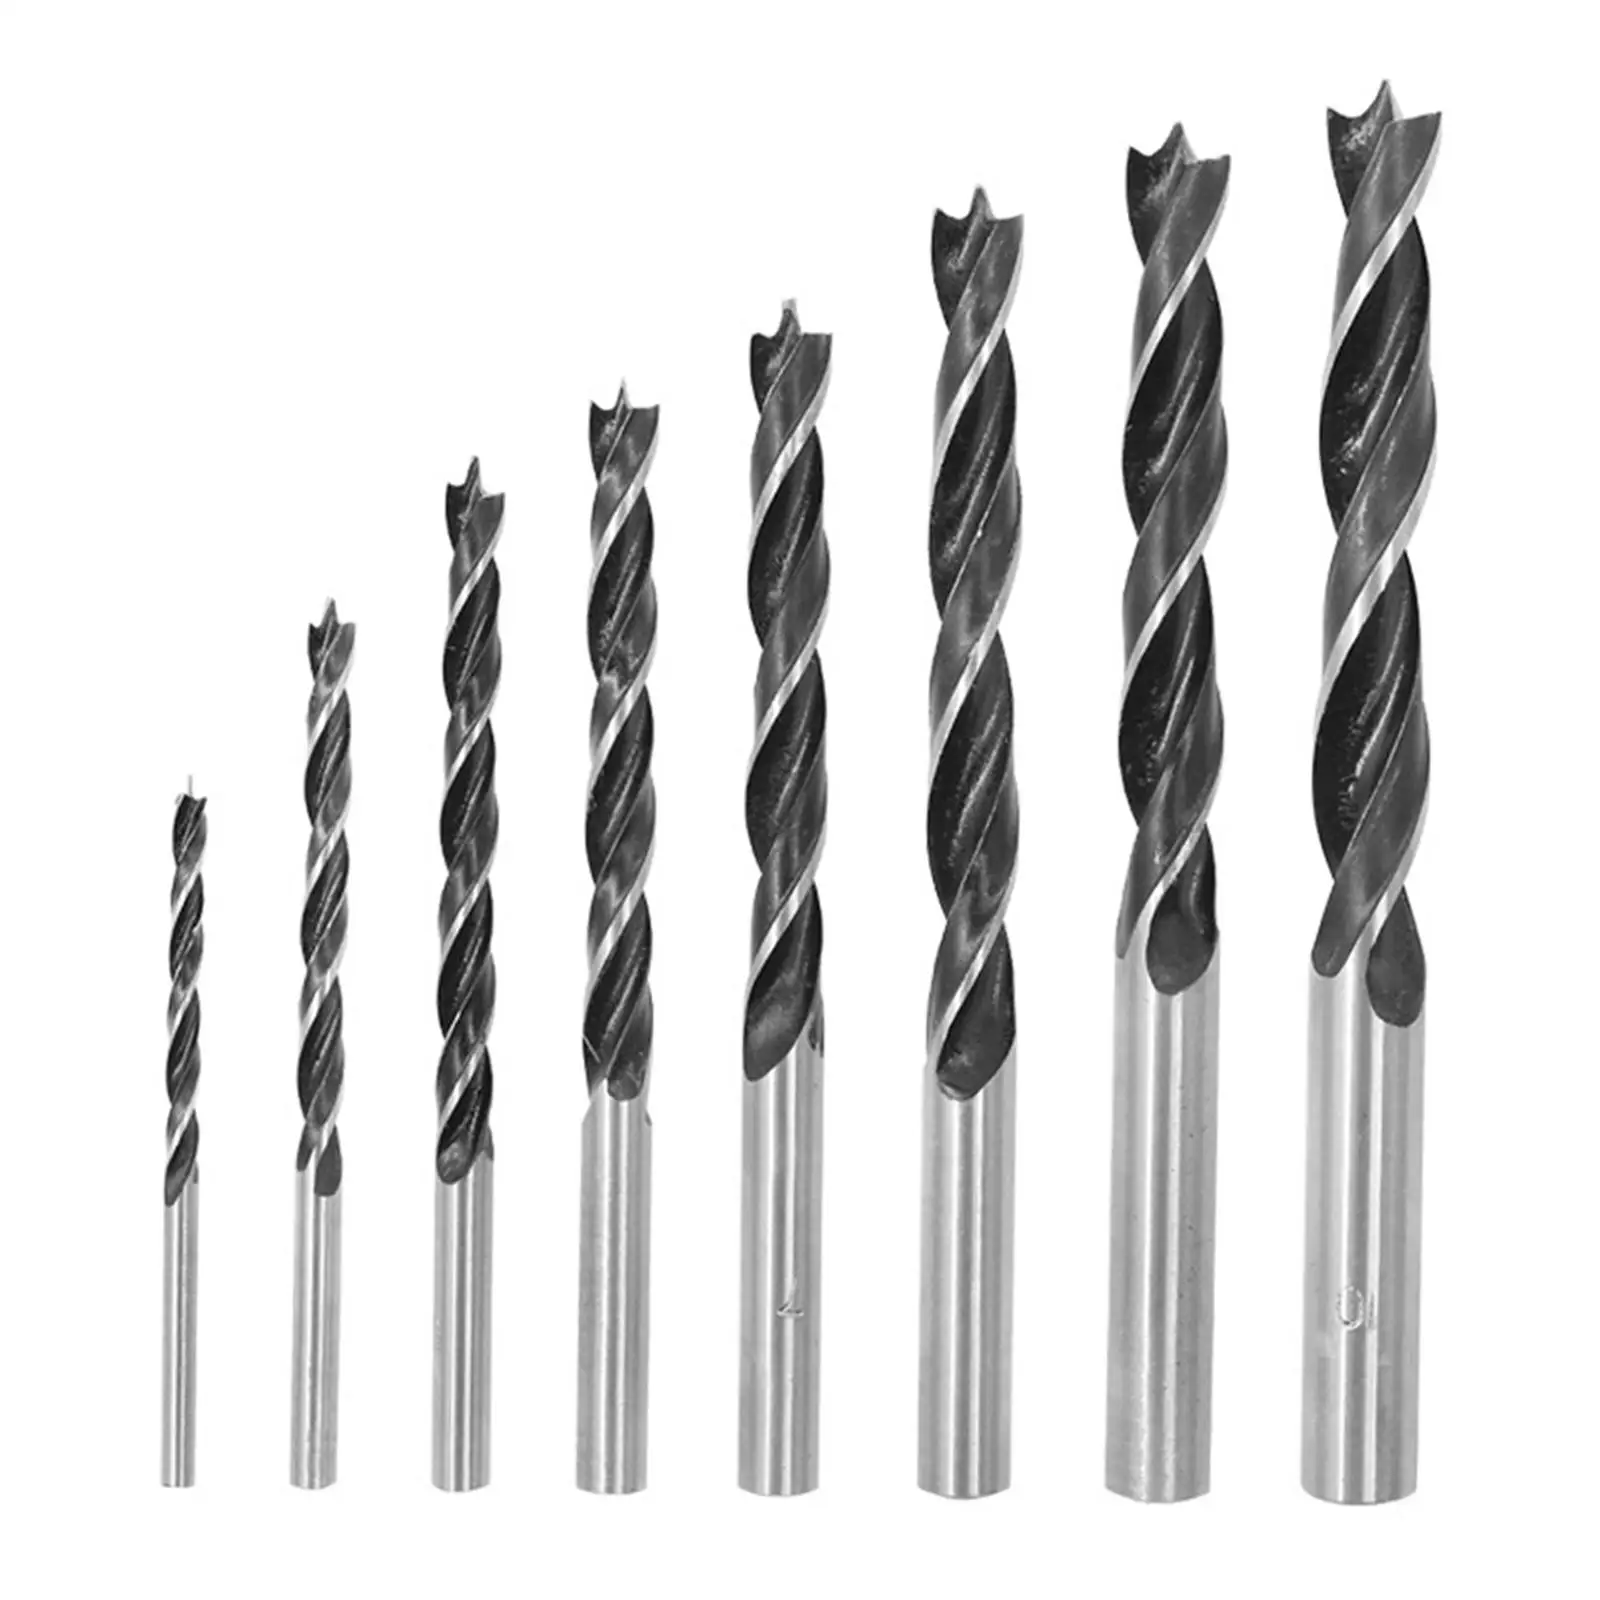 8Pcs Multifunctional Drill Bit Set 3mm-10mm Round Straight  Carbon Steel    Tools for Carpenter